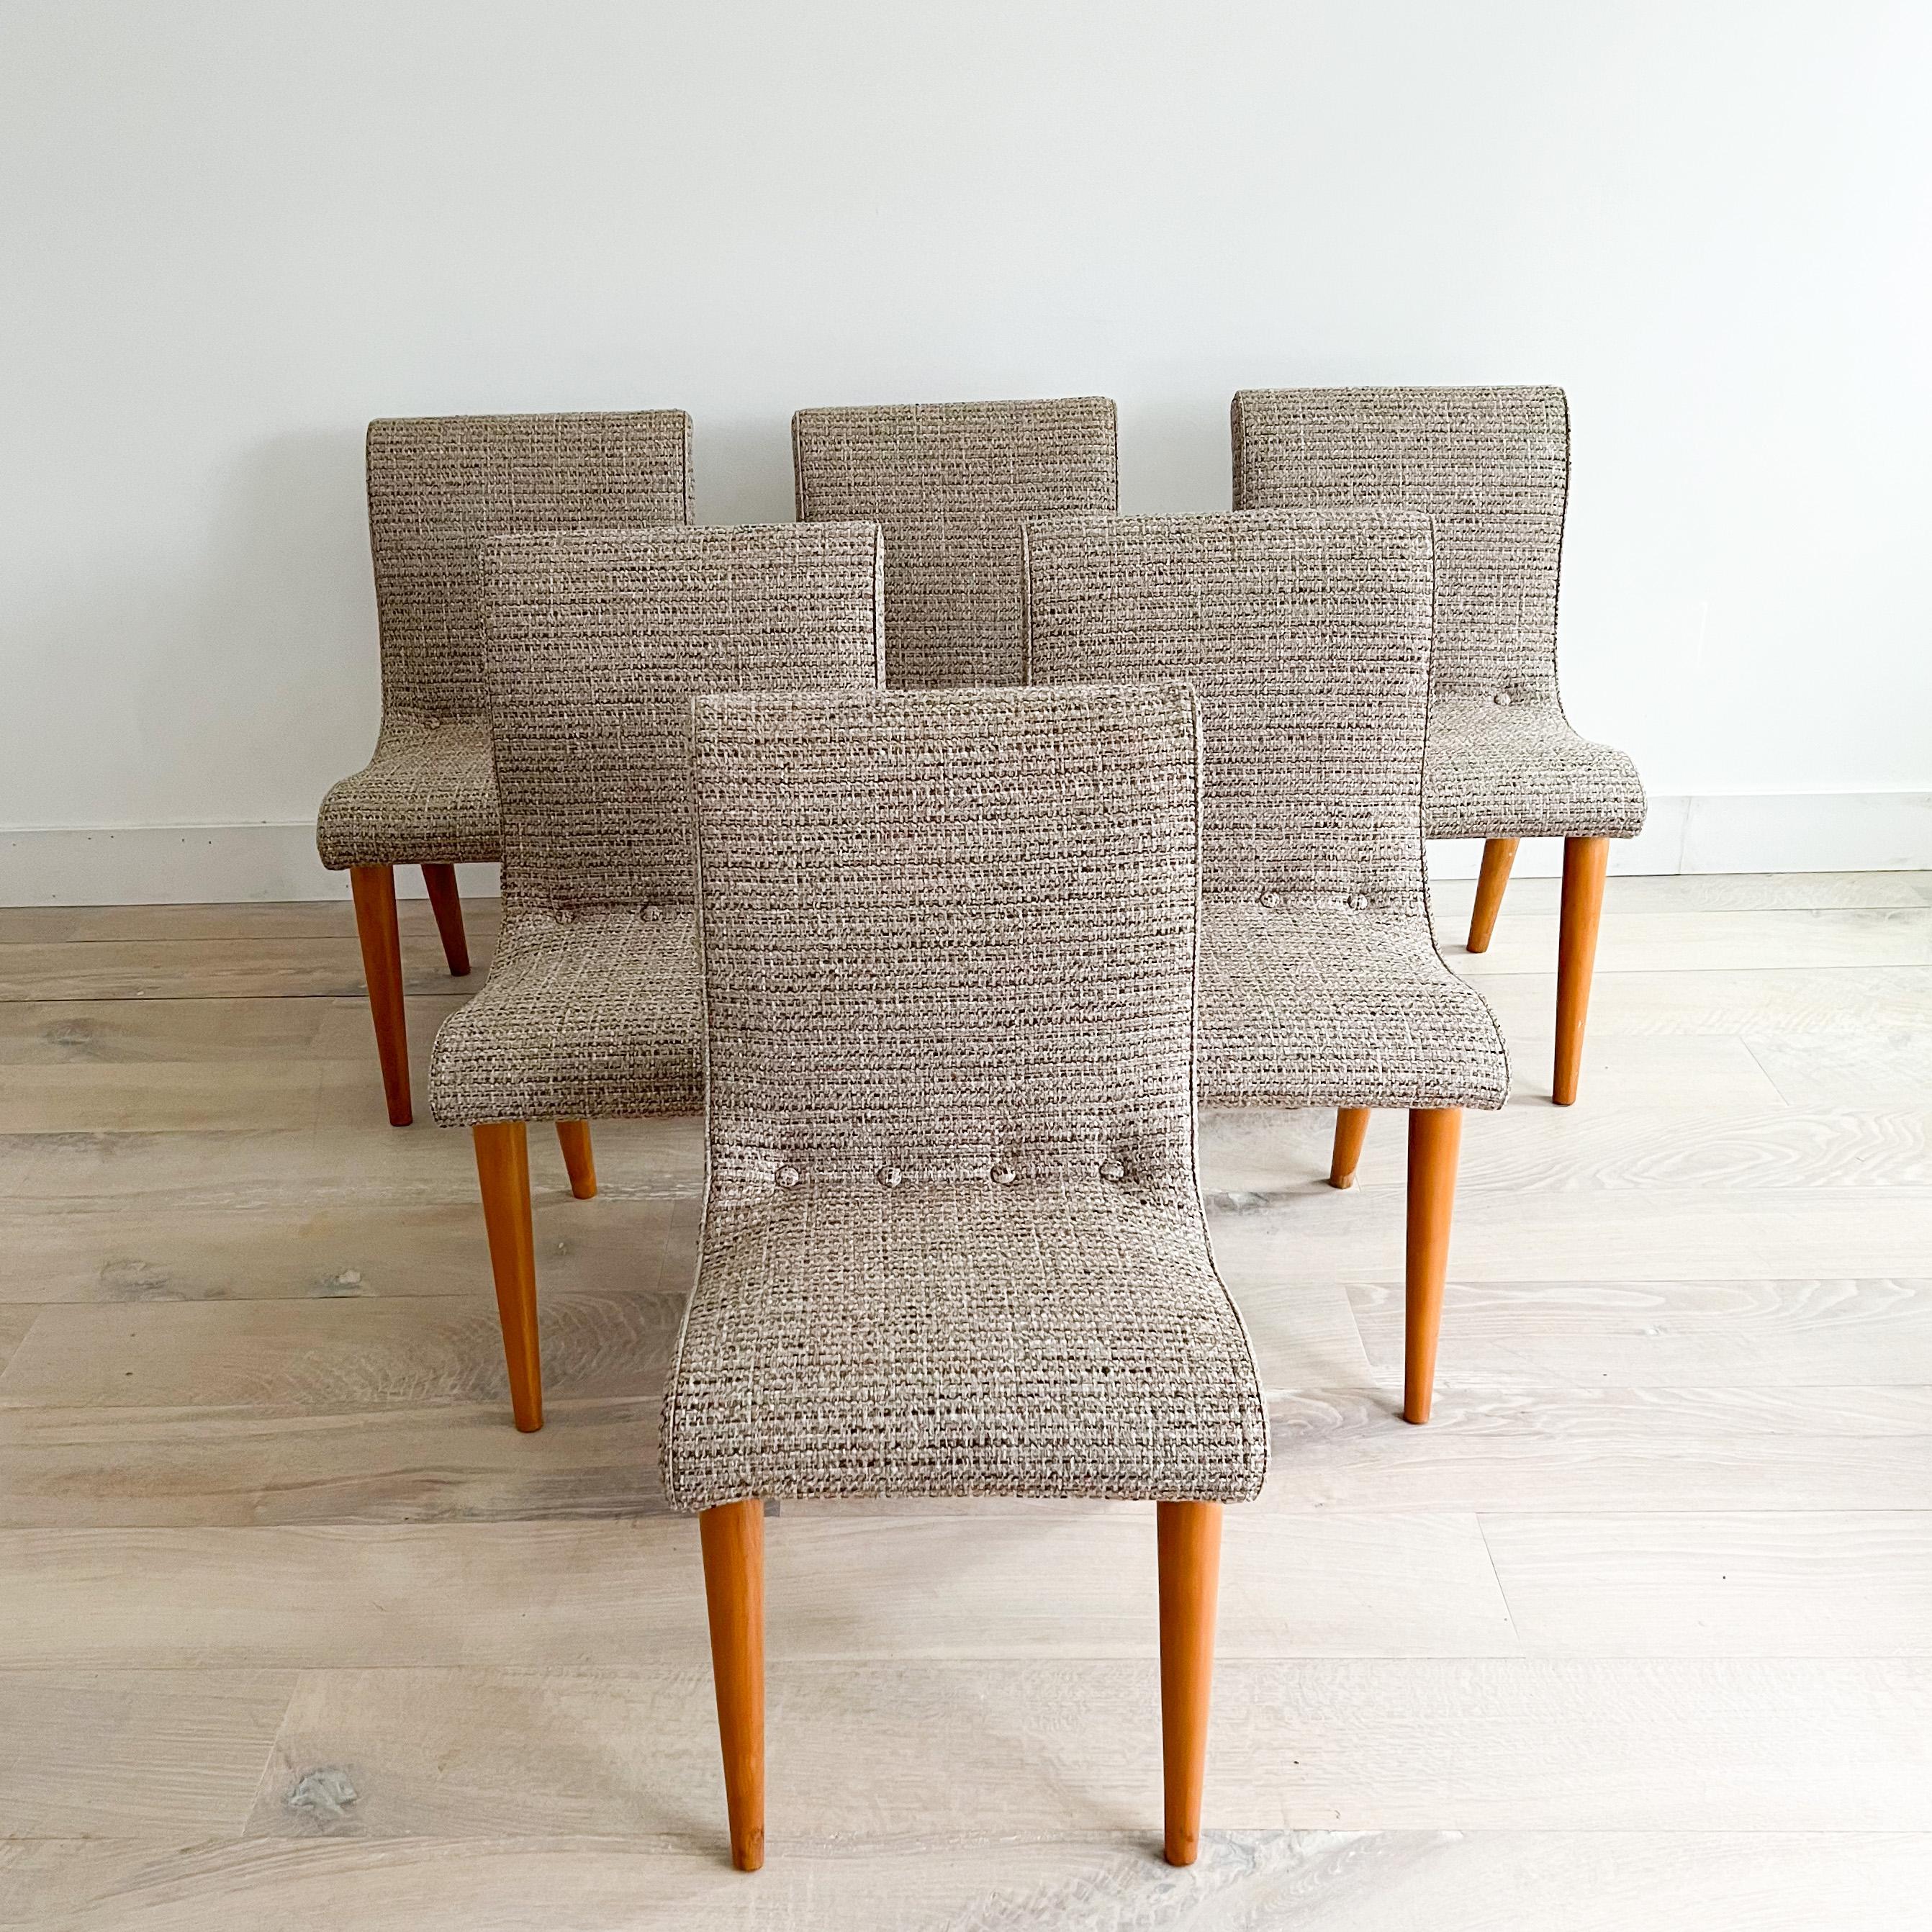 Set of 6 Mid-Century Modern birch dining chairs designed by Russel Wright for Conant Ball. New beige/brown tweed upholstery.